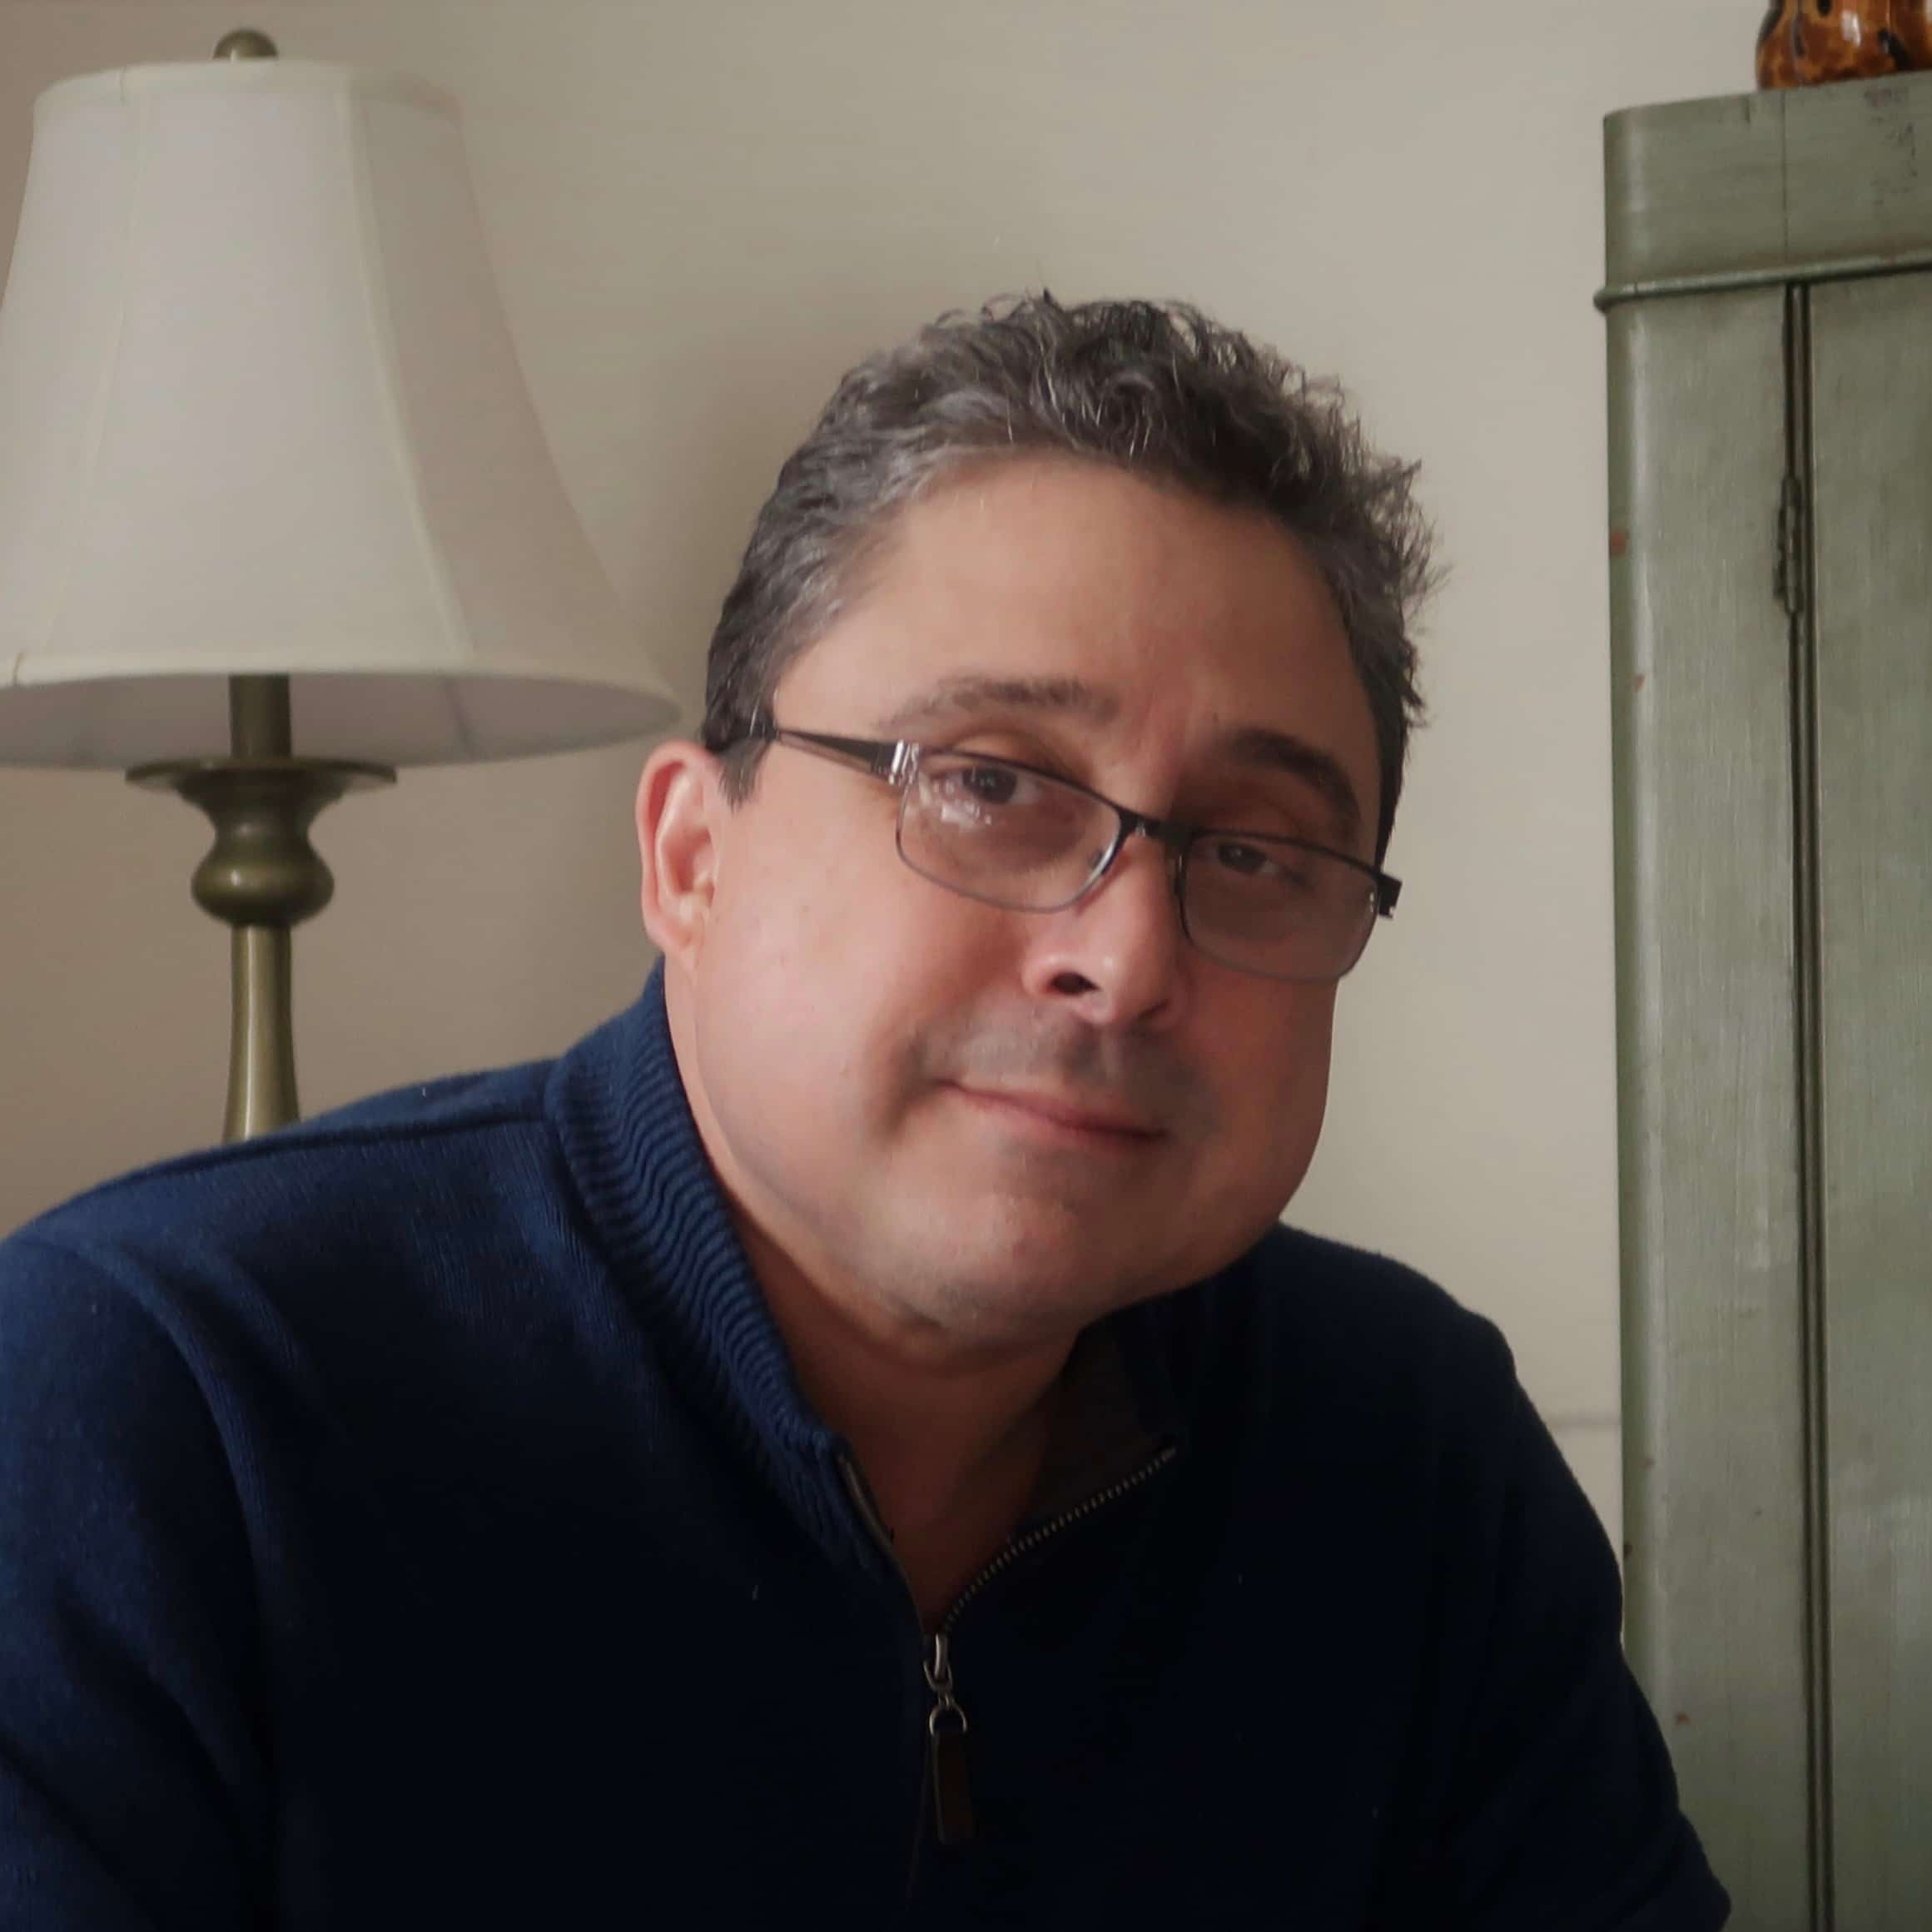 Man wearing glasses and a navy pullover sweater